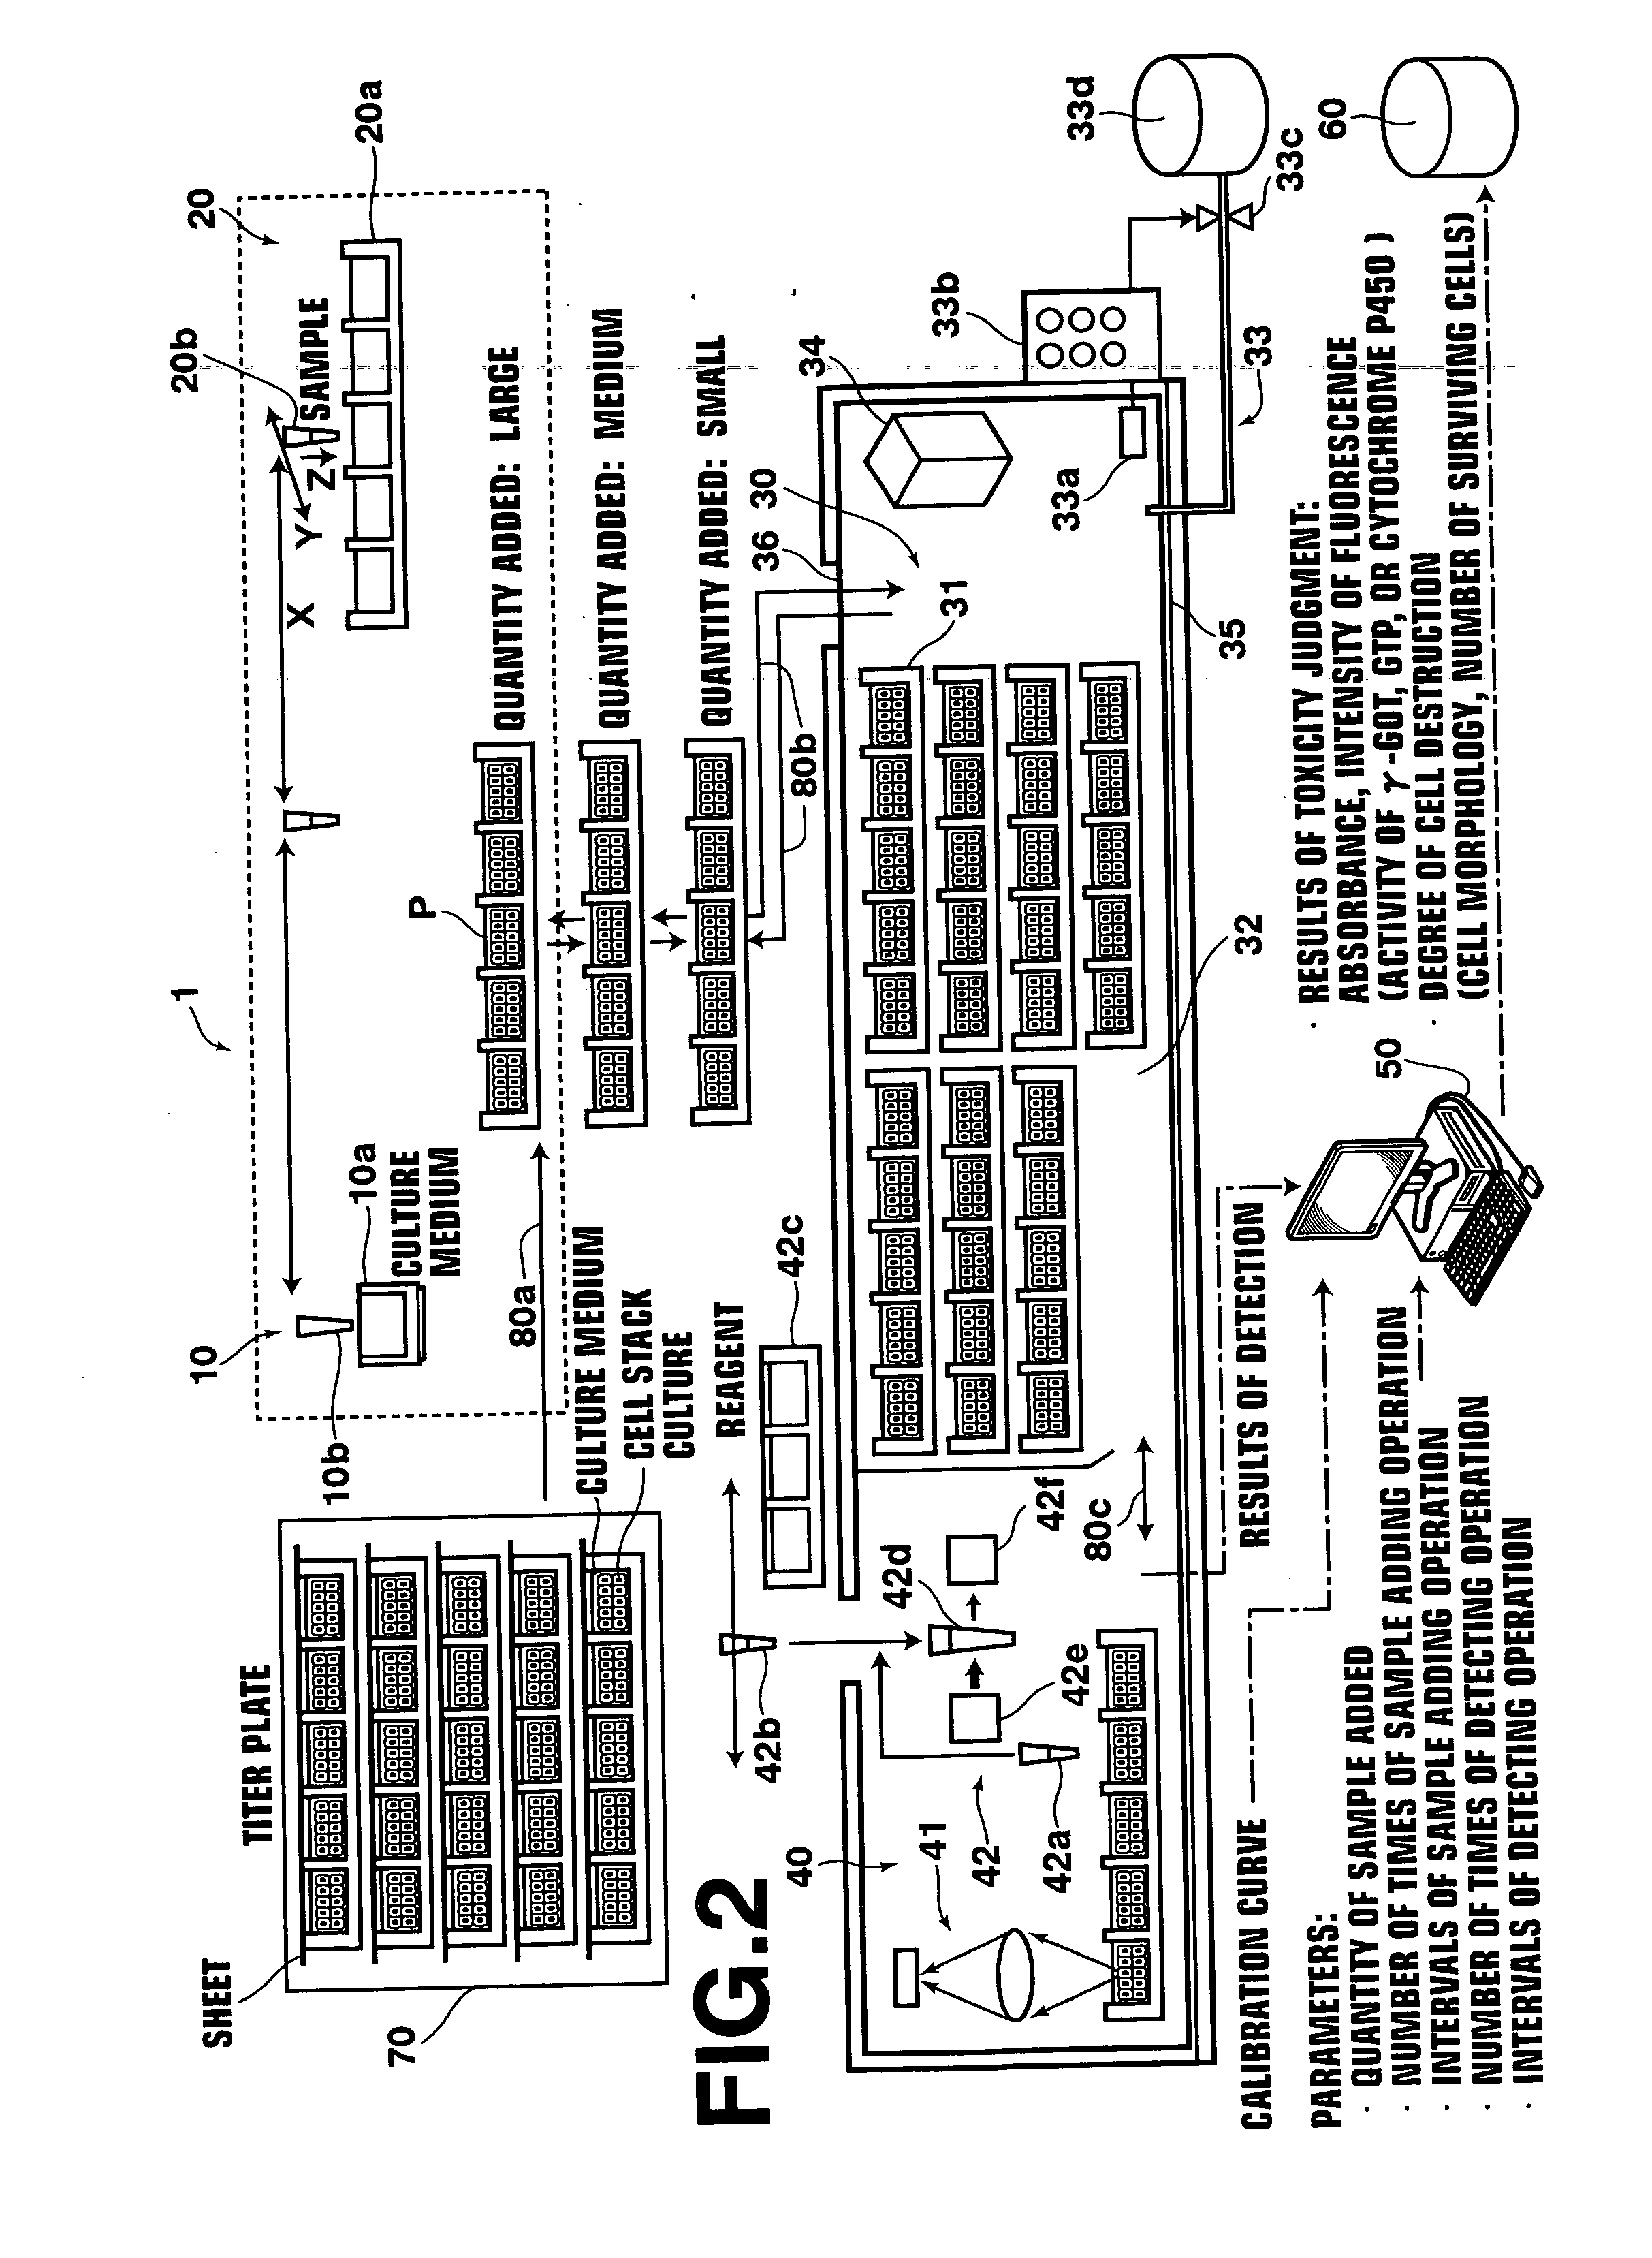 Toxicity testing apparatus for cell stack cultures